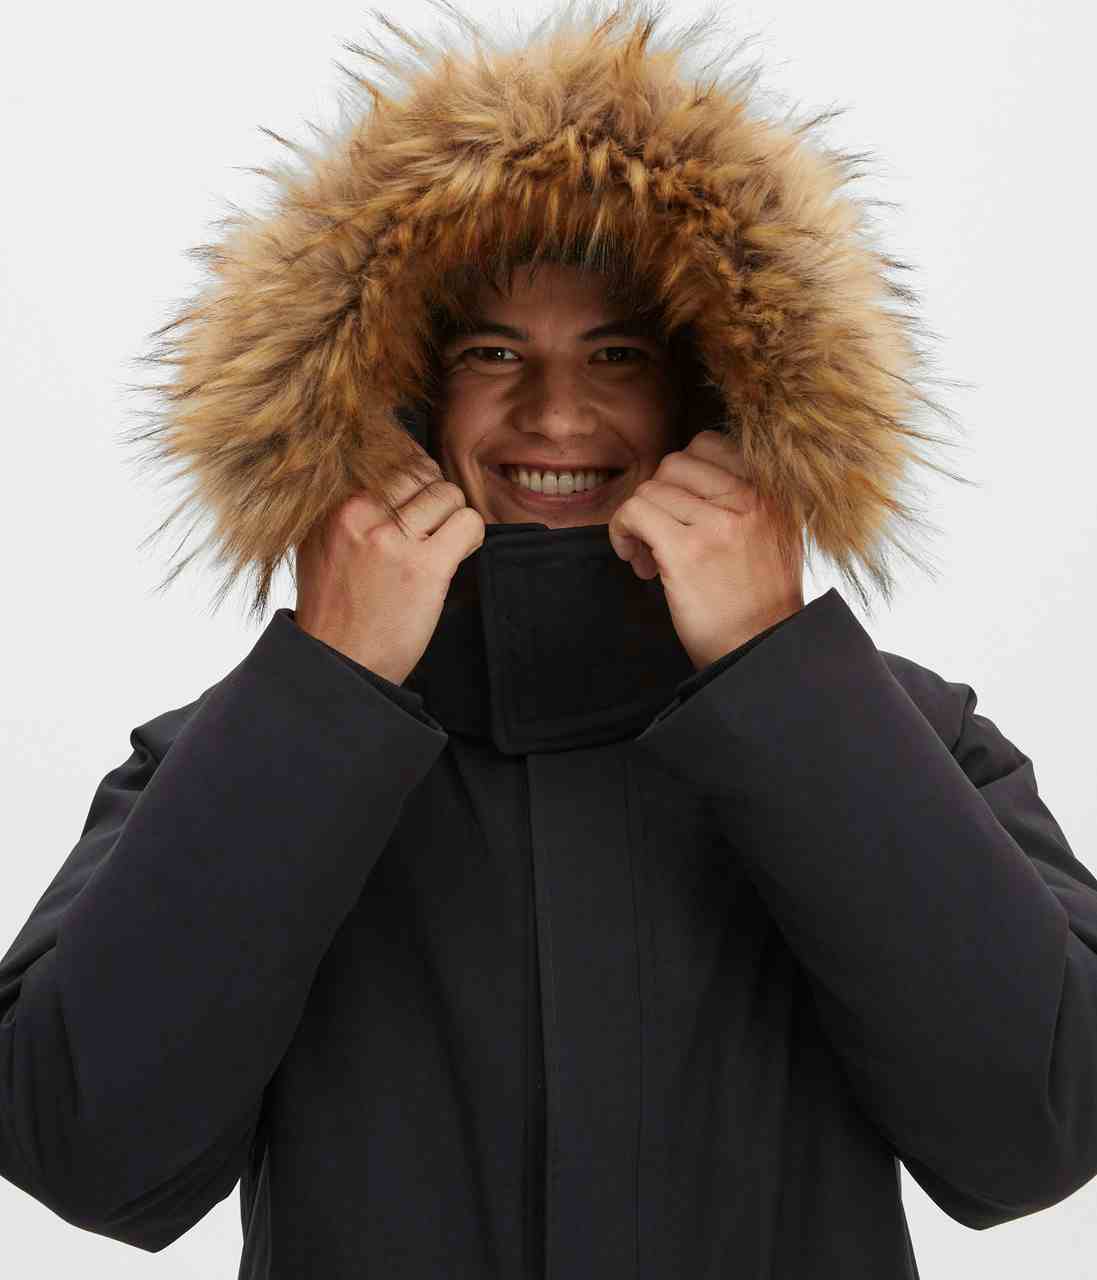 Great Northern Down Parka Black